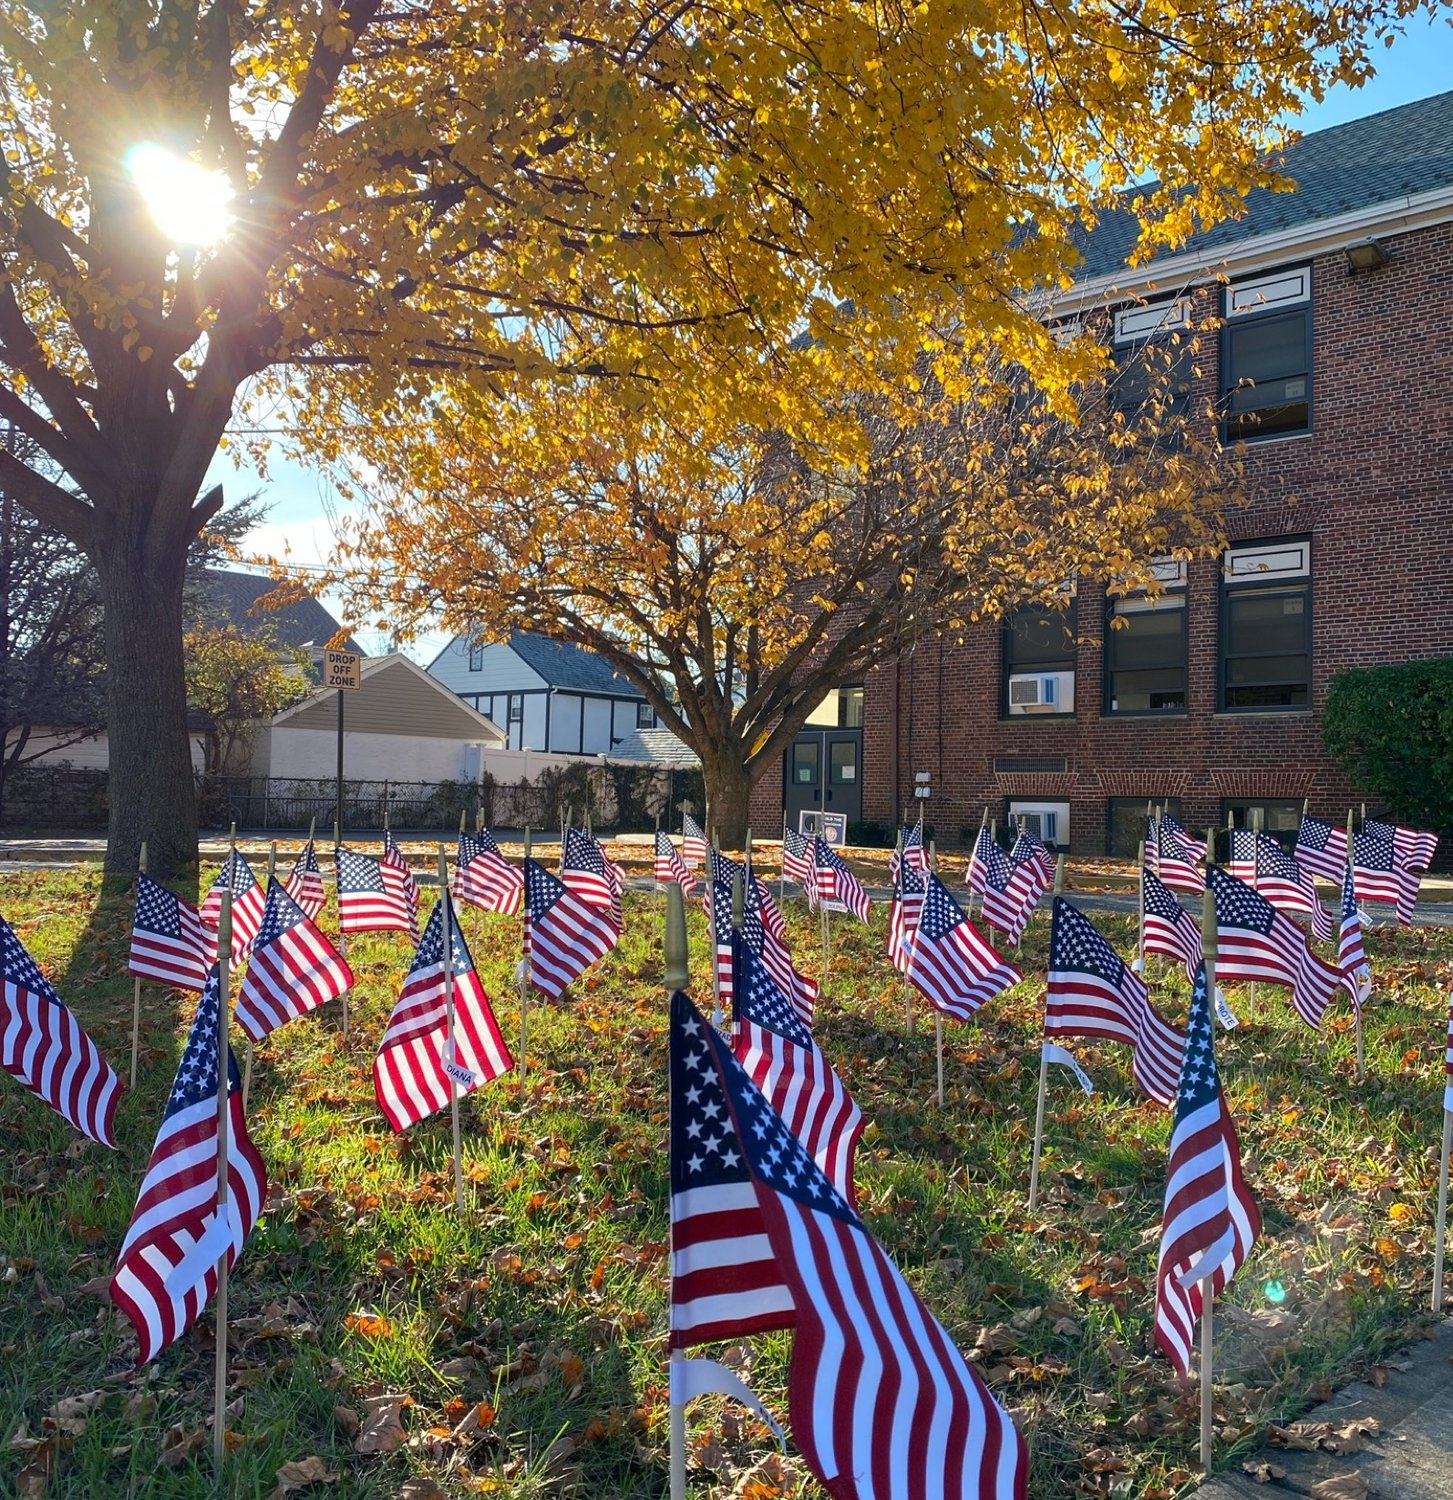 Flags lined the school’s lawn as part of the many Veterans Day activities the school district took part in to salute servicemen and women.